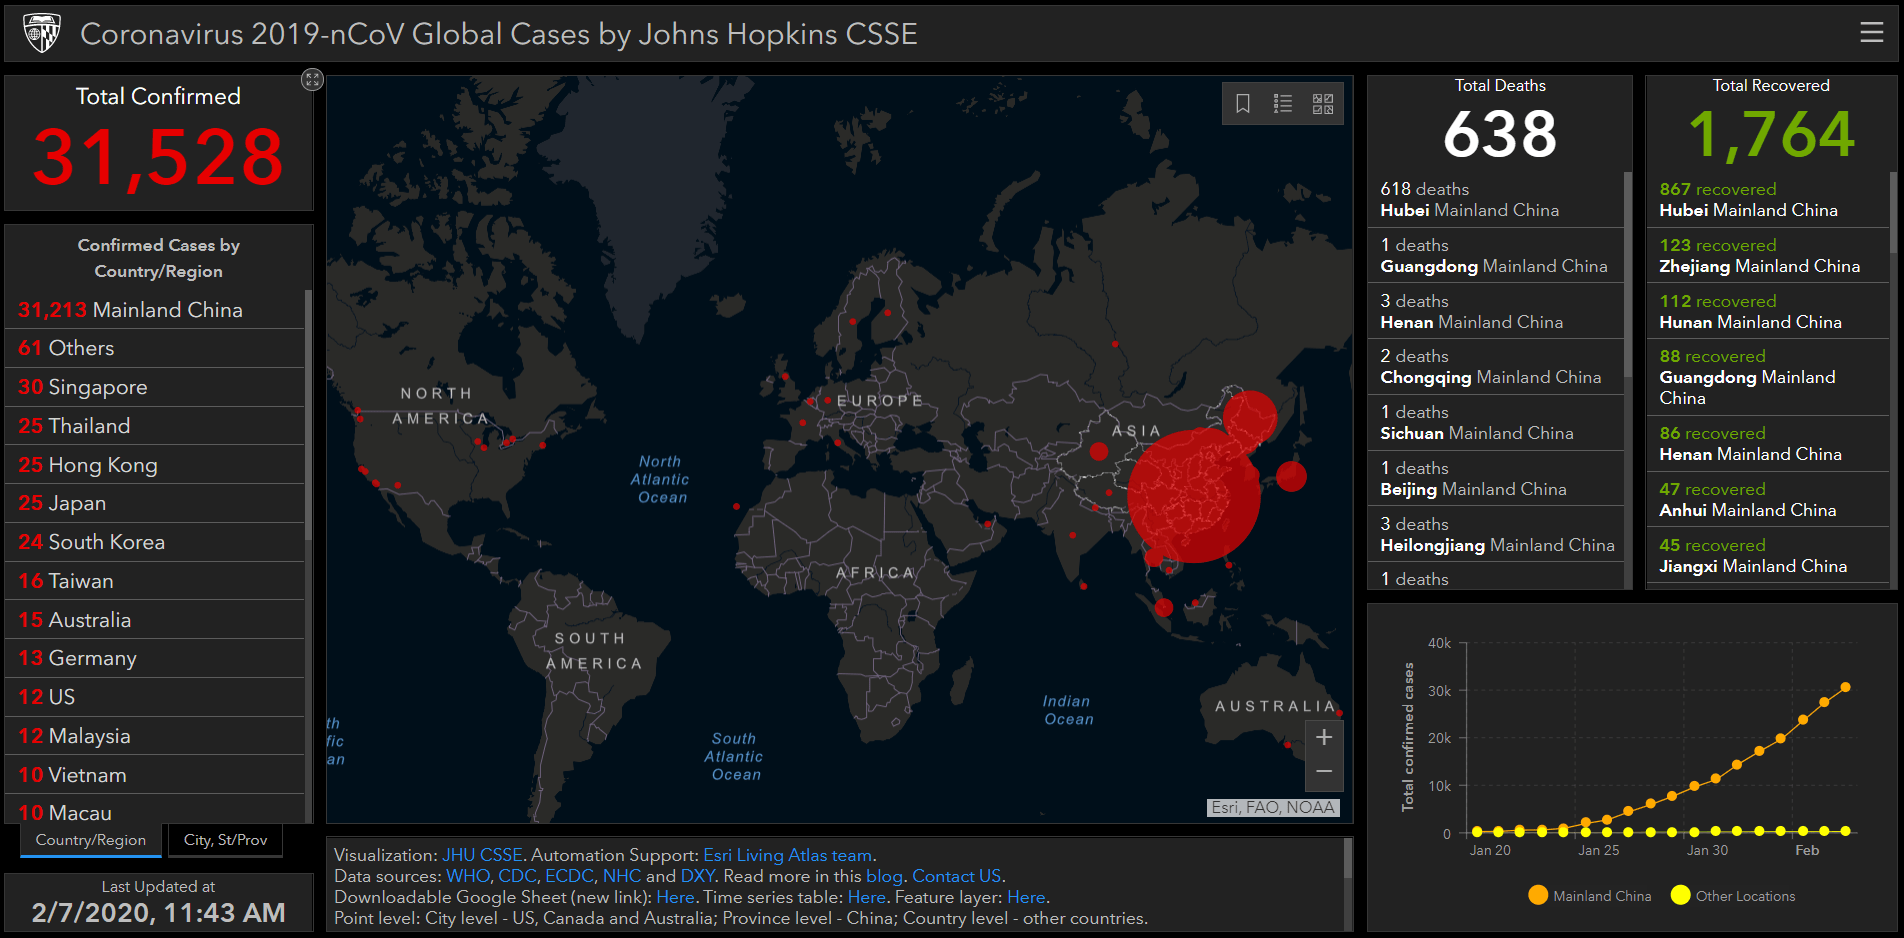 Infographic showing Coronavirus epicentre and hotspots around the world from John Hopkins in 2019. Published in February 2020